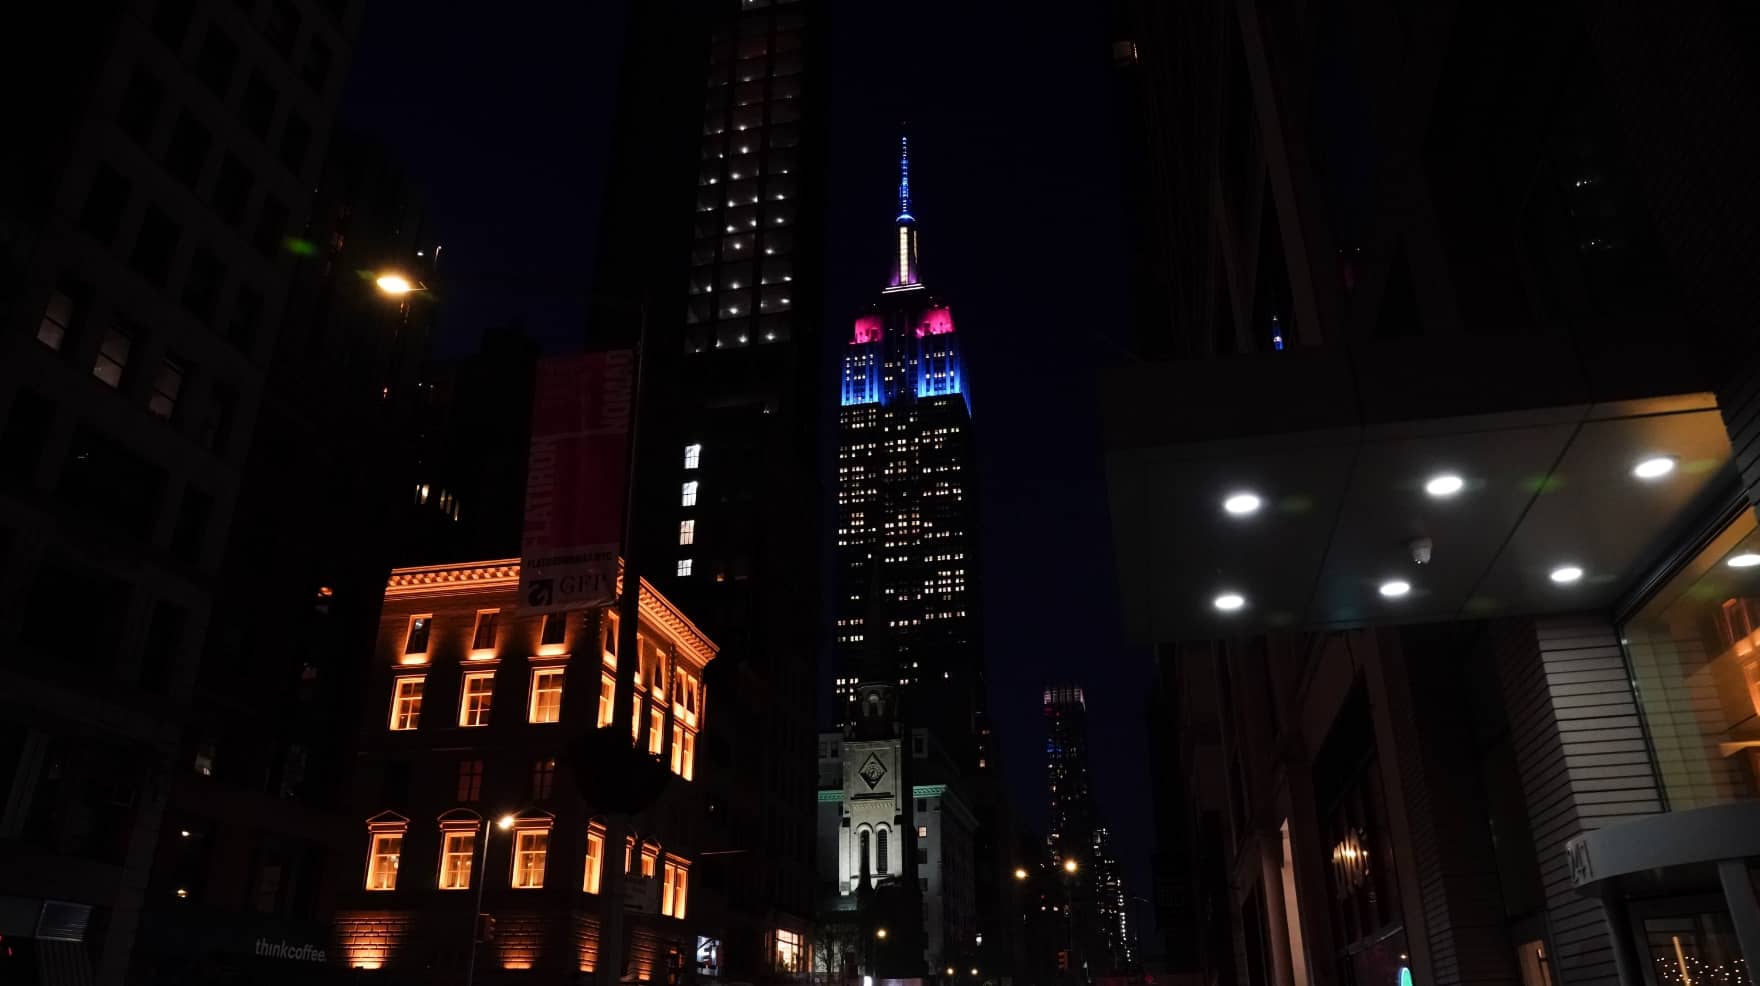 The Empire State Building lit up at night in WSF brand colors. [Credit: Bryan Smith]